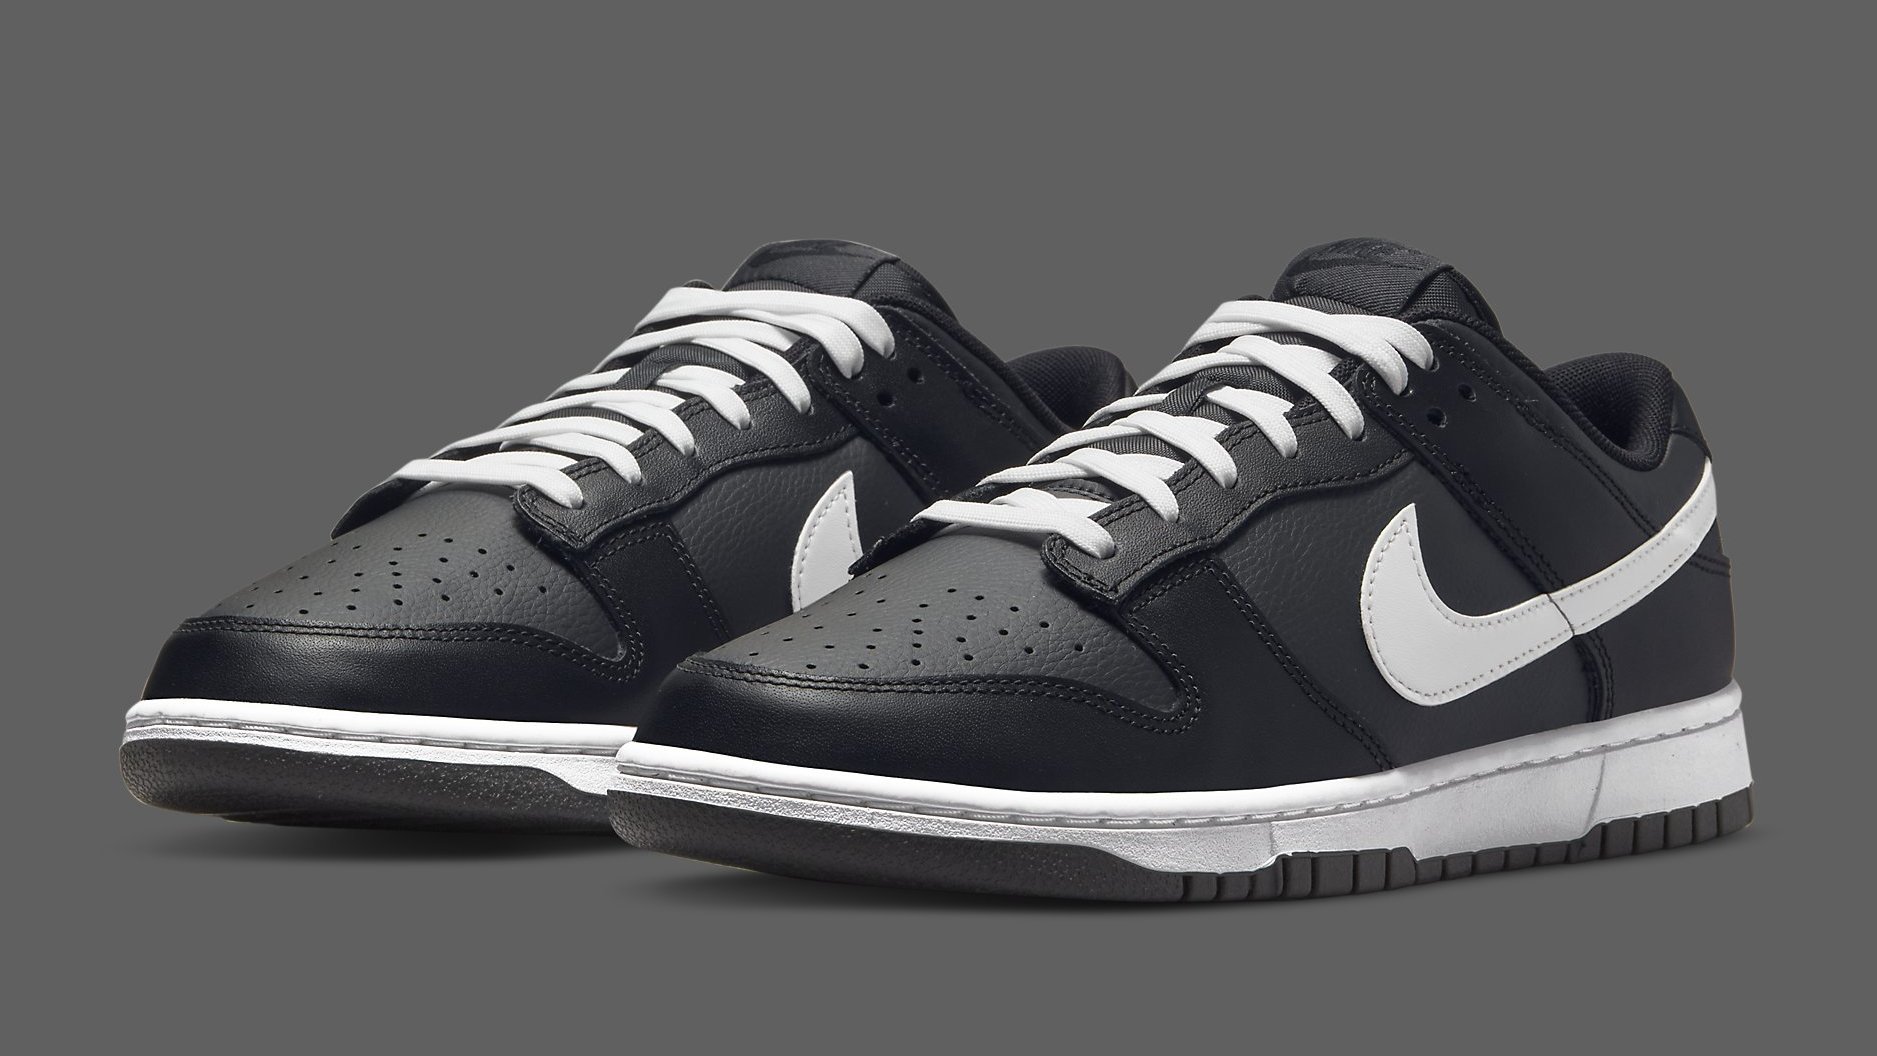 Nike Dunk Low 'Black/White' DJ6188-002 Release Date | Sole Collector